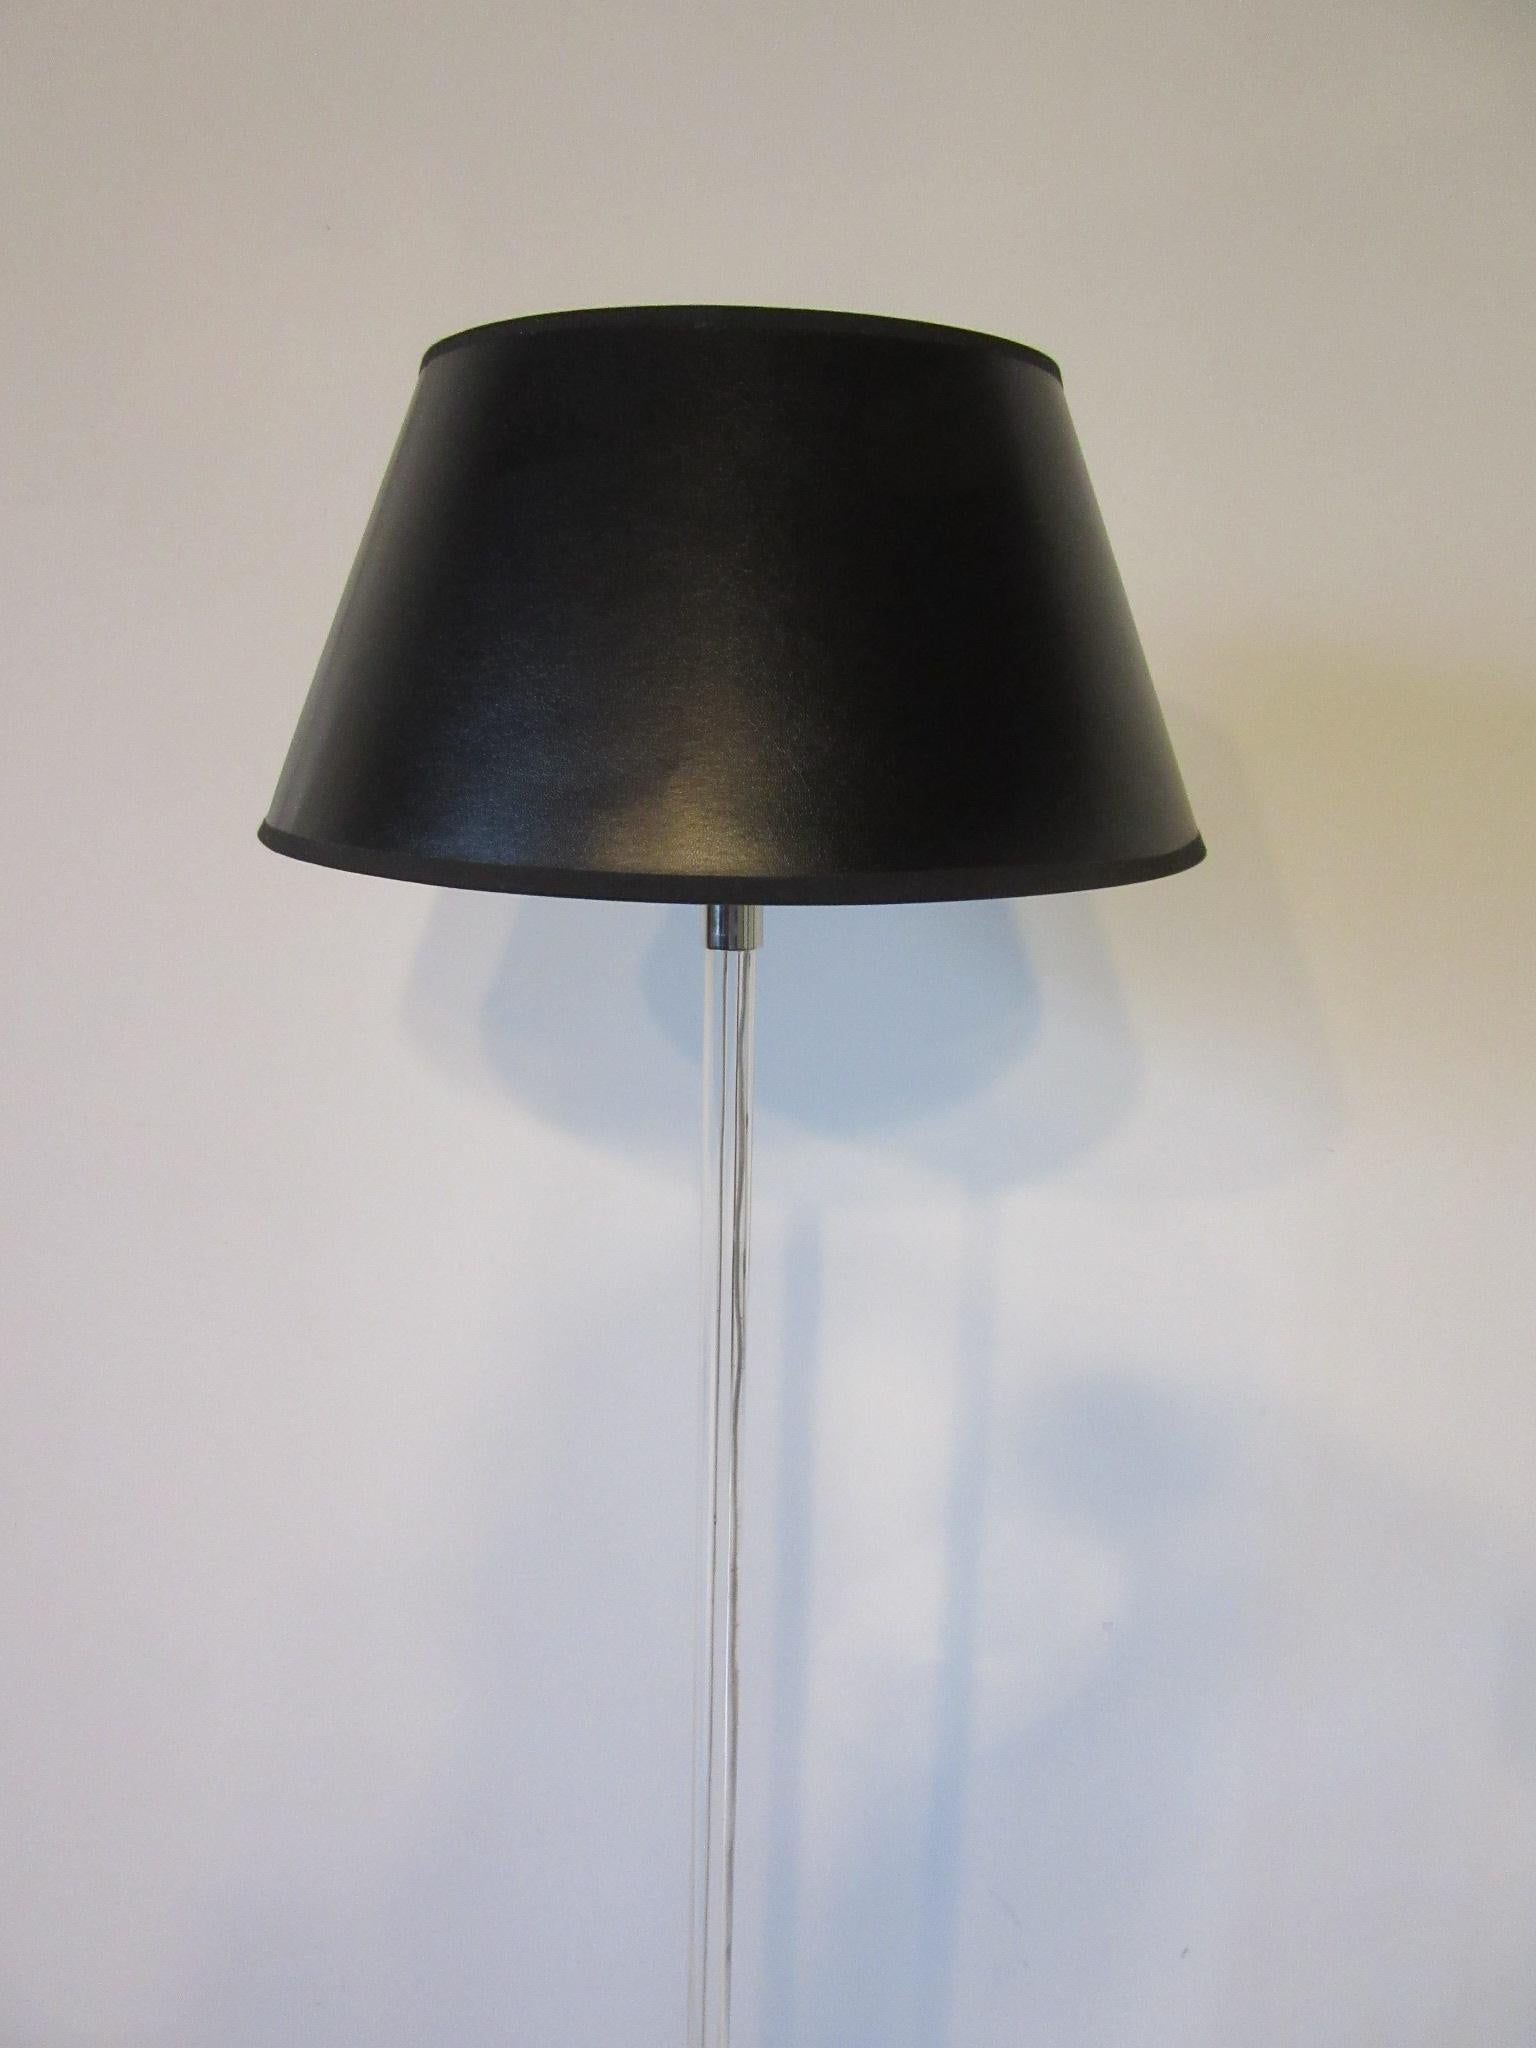 A simple elegant Lucite and chromed floor lamp with circular base designed by Peter Hamburger and distributed by Knoll.